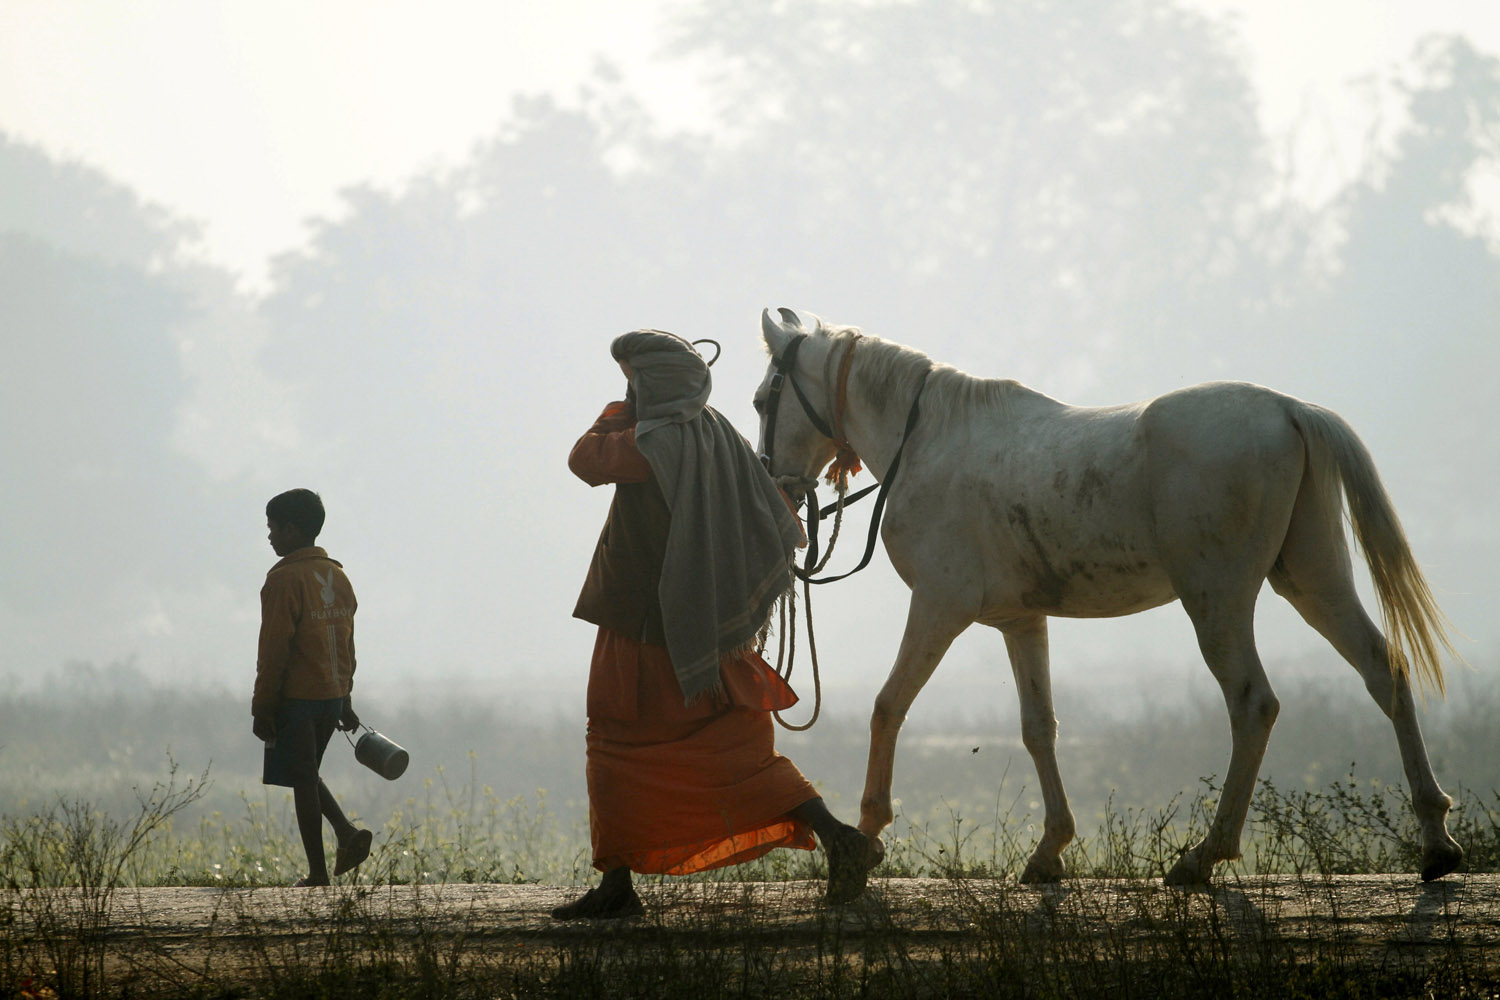 Feb. 27, 2013. A Hindu holy man belonging to the Ramta Panch group of the Juna Akhara sect walks a horse to be loaded onto a truck before leaving from the outskirts of Allahabad, India.